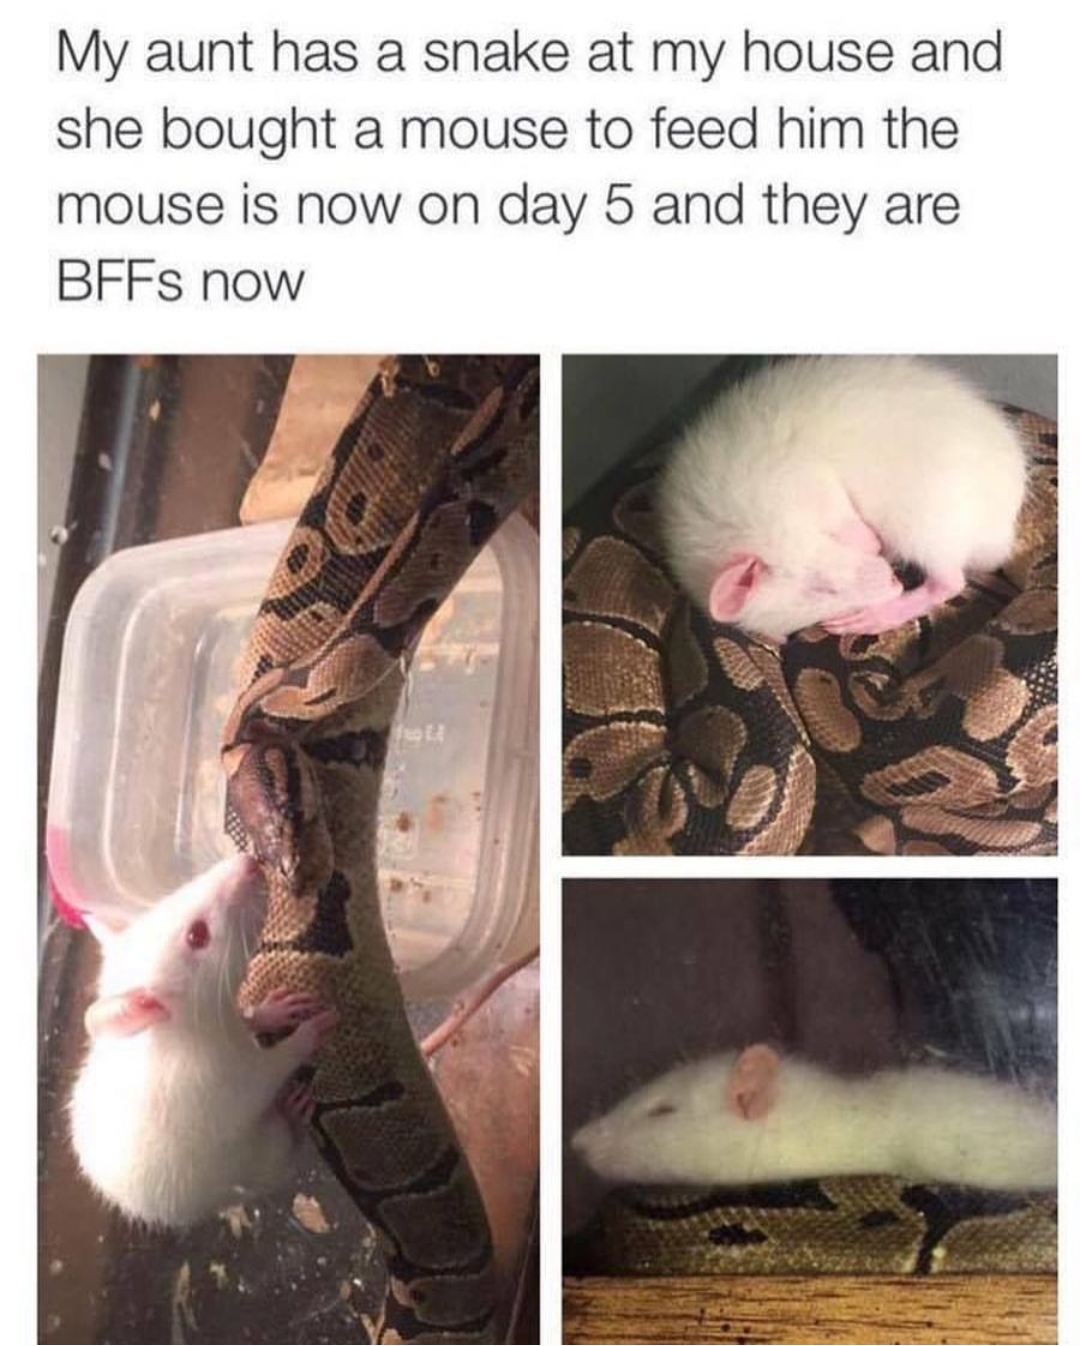 mouse eats snake - My aunt has a snake at my house and she bought a mouse to feed him the mouse is now on day 5 and they are BFFs now